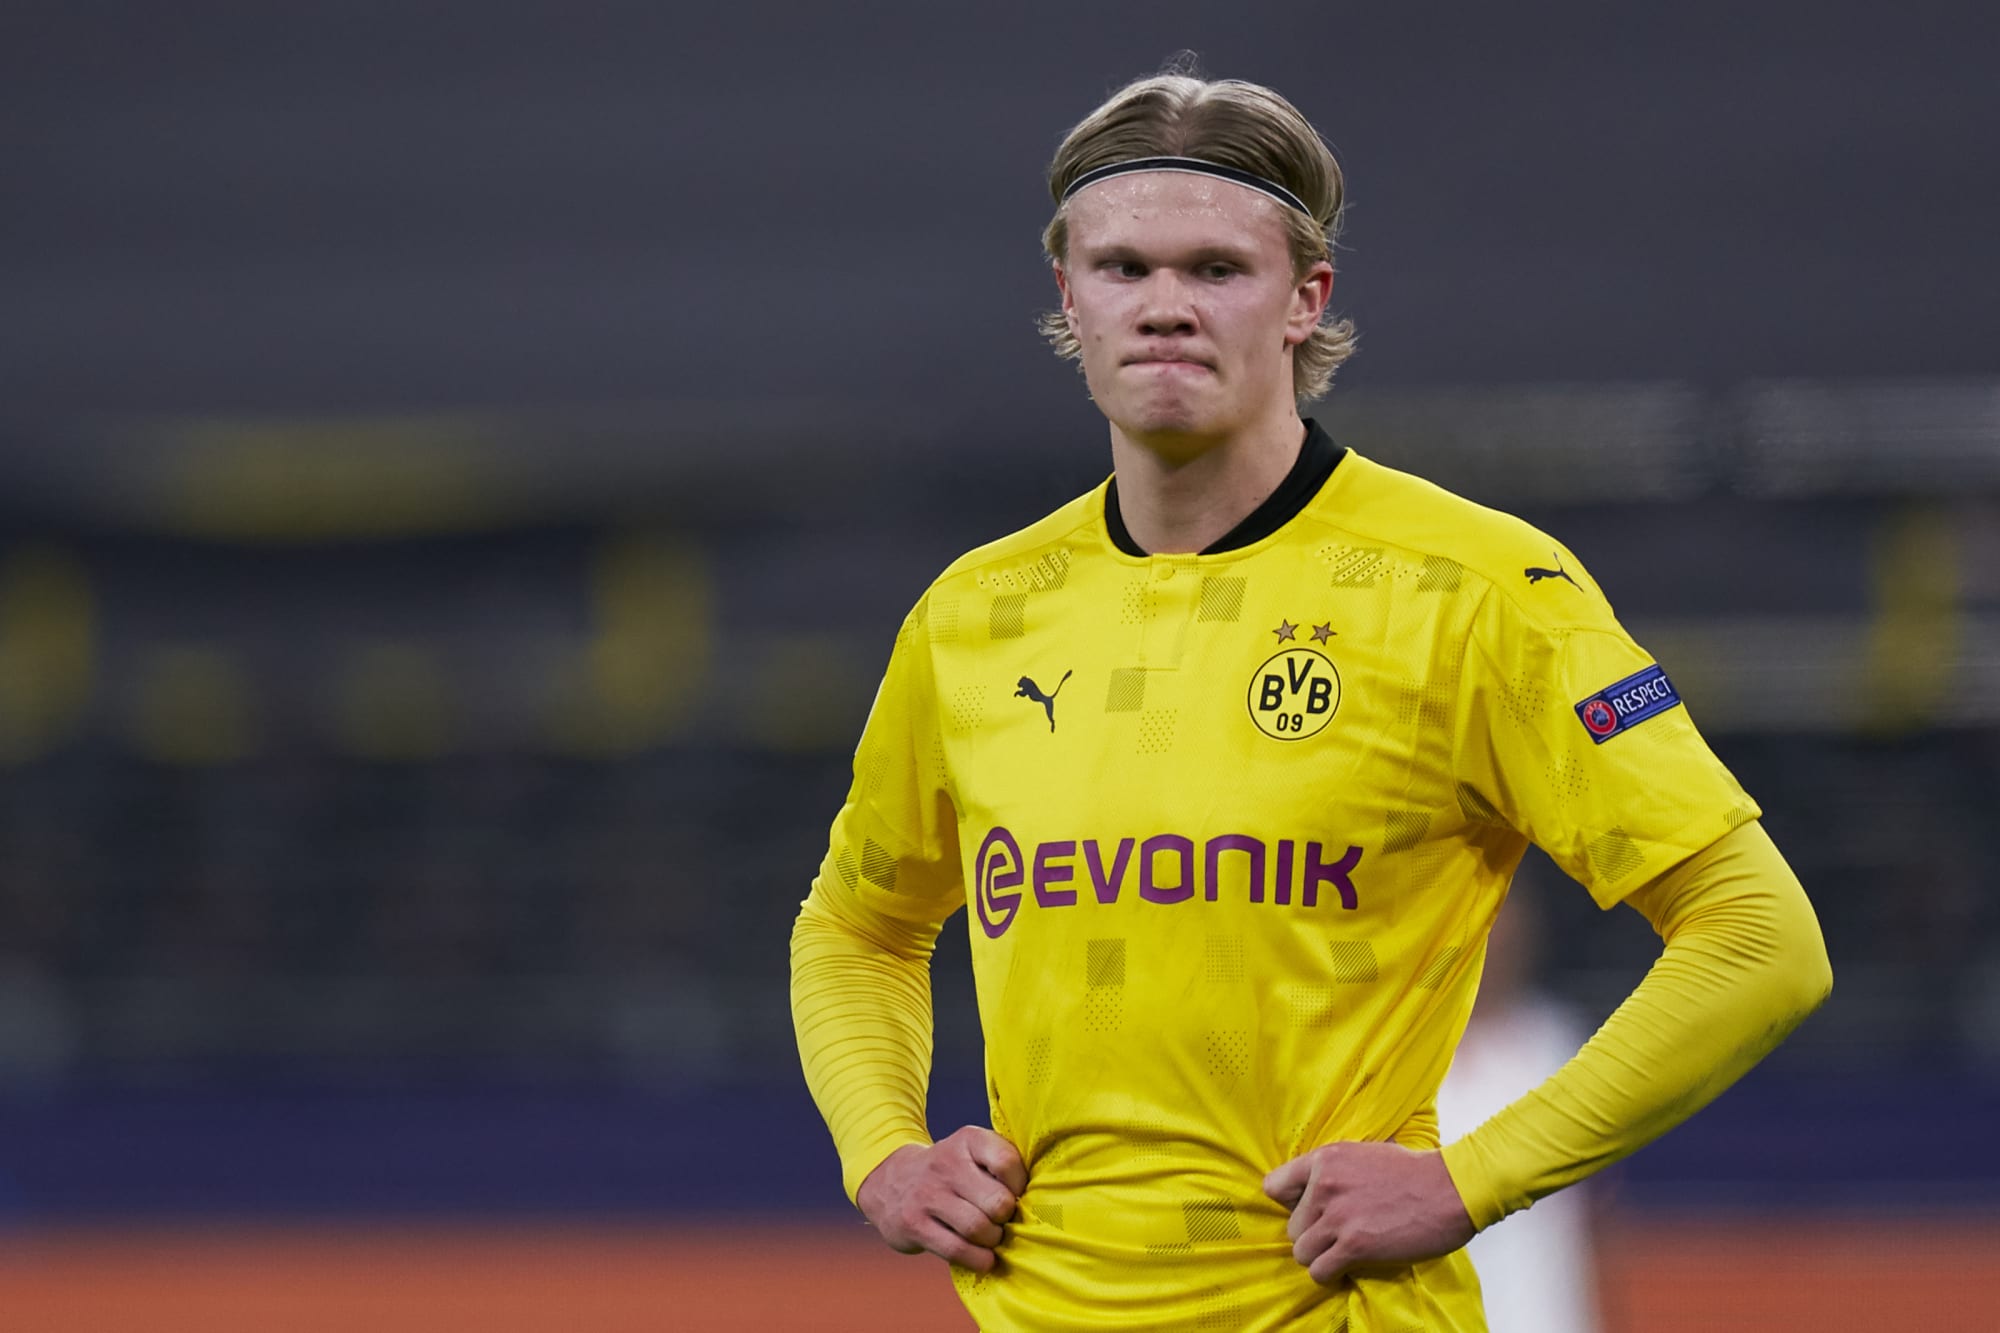 Real Madrid Transfers: Yes, Erling Haaland is worth 150 million euros